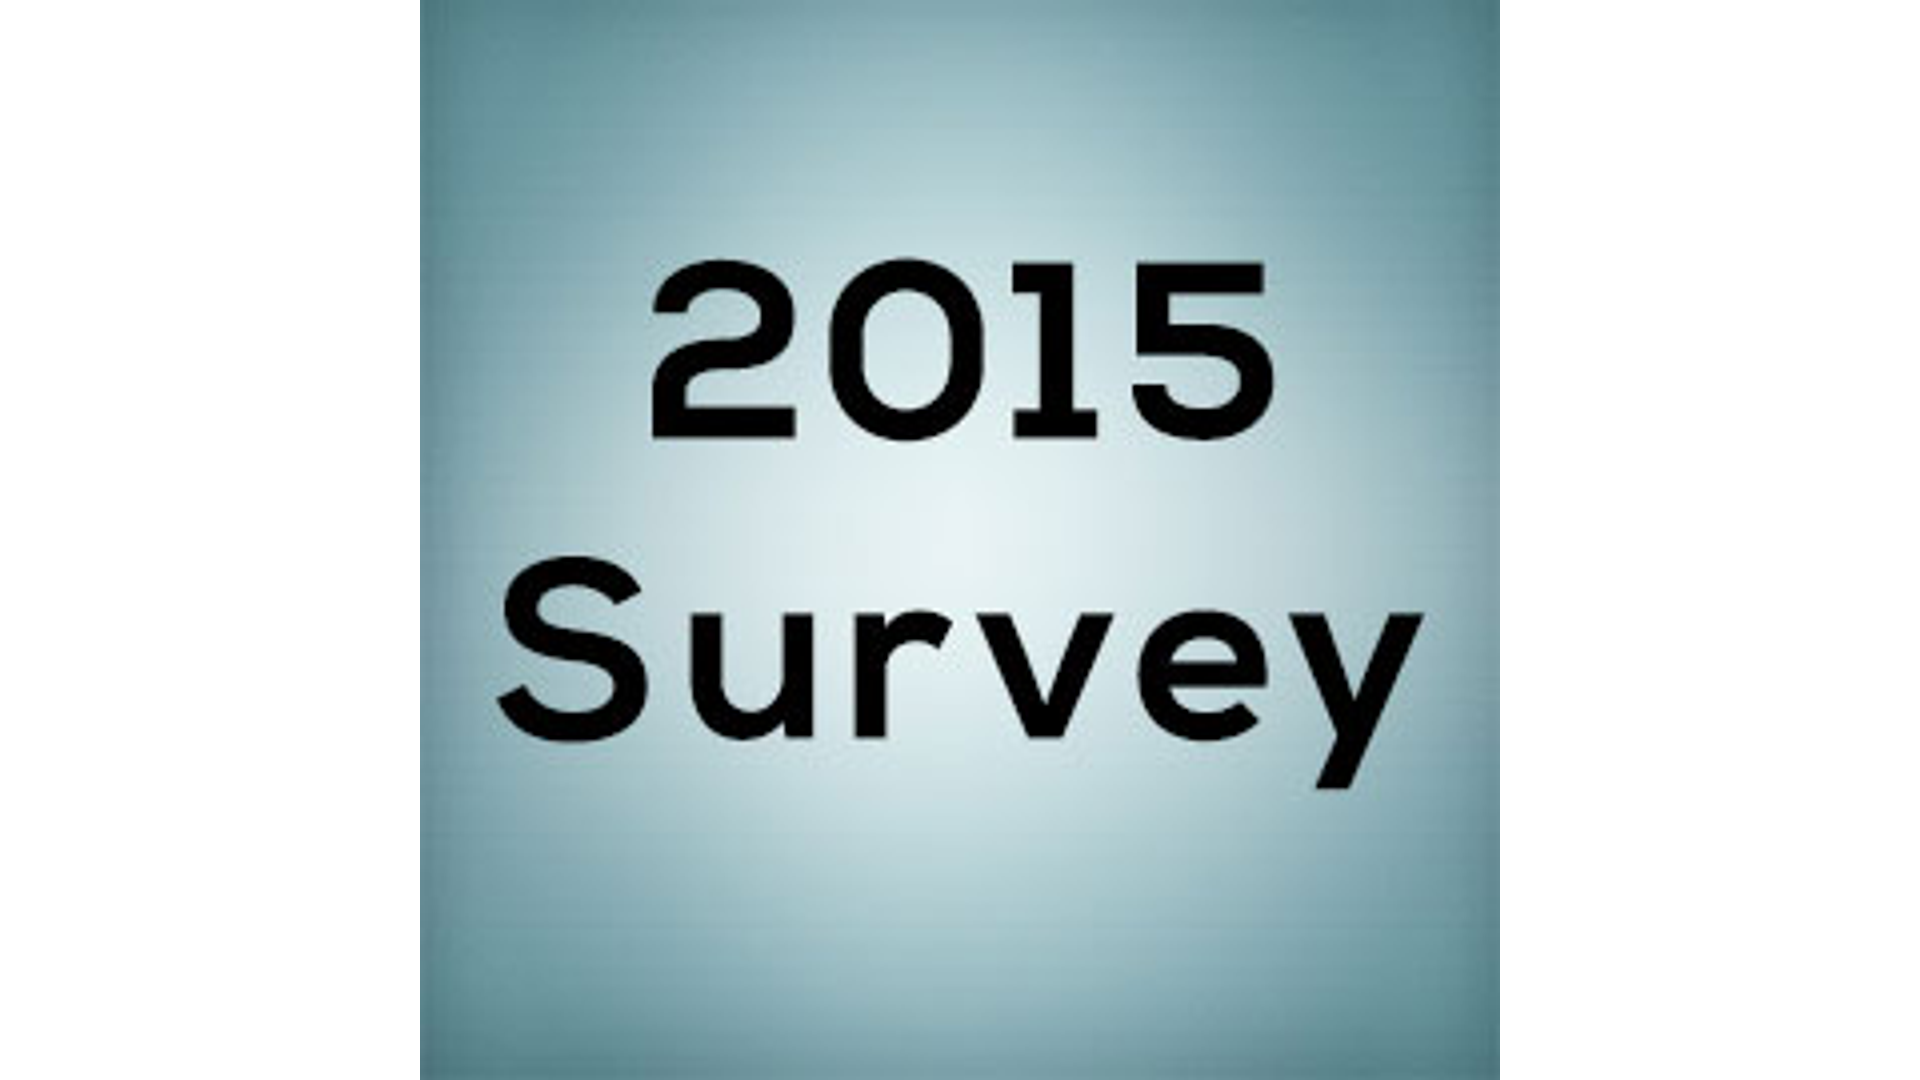 2015 Attend And Serve Survey Hero Image